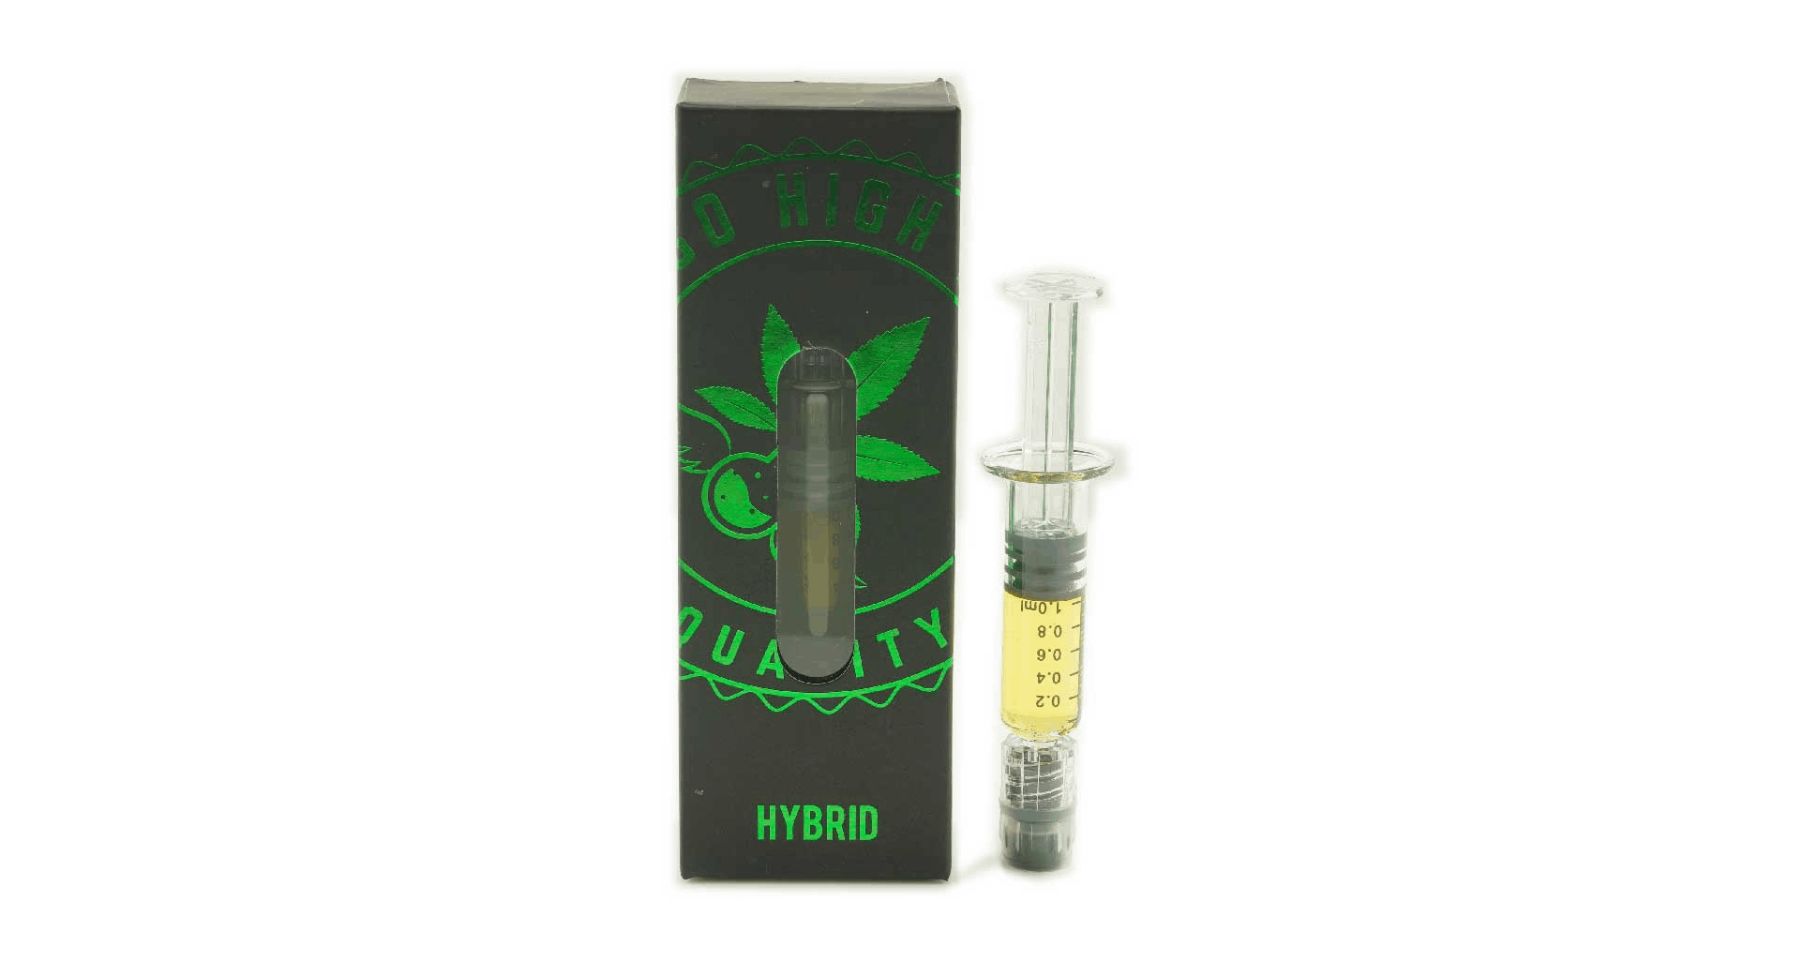 If you want to enjoy the Blue Dream strain but don’t appreciate inhaling smoke, this Blue Dream oil from So High Extracts is an excellent alternative. Buy weed online today. 